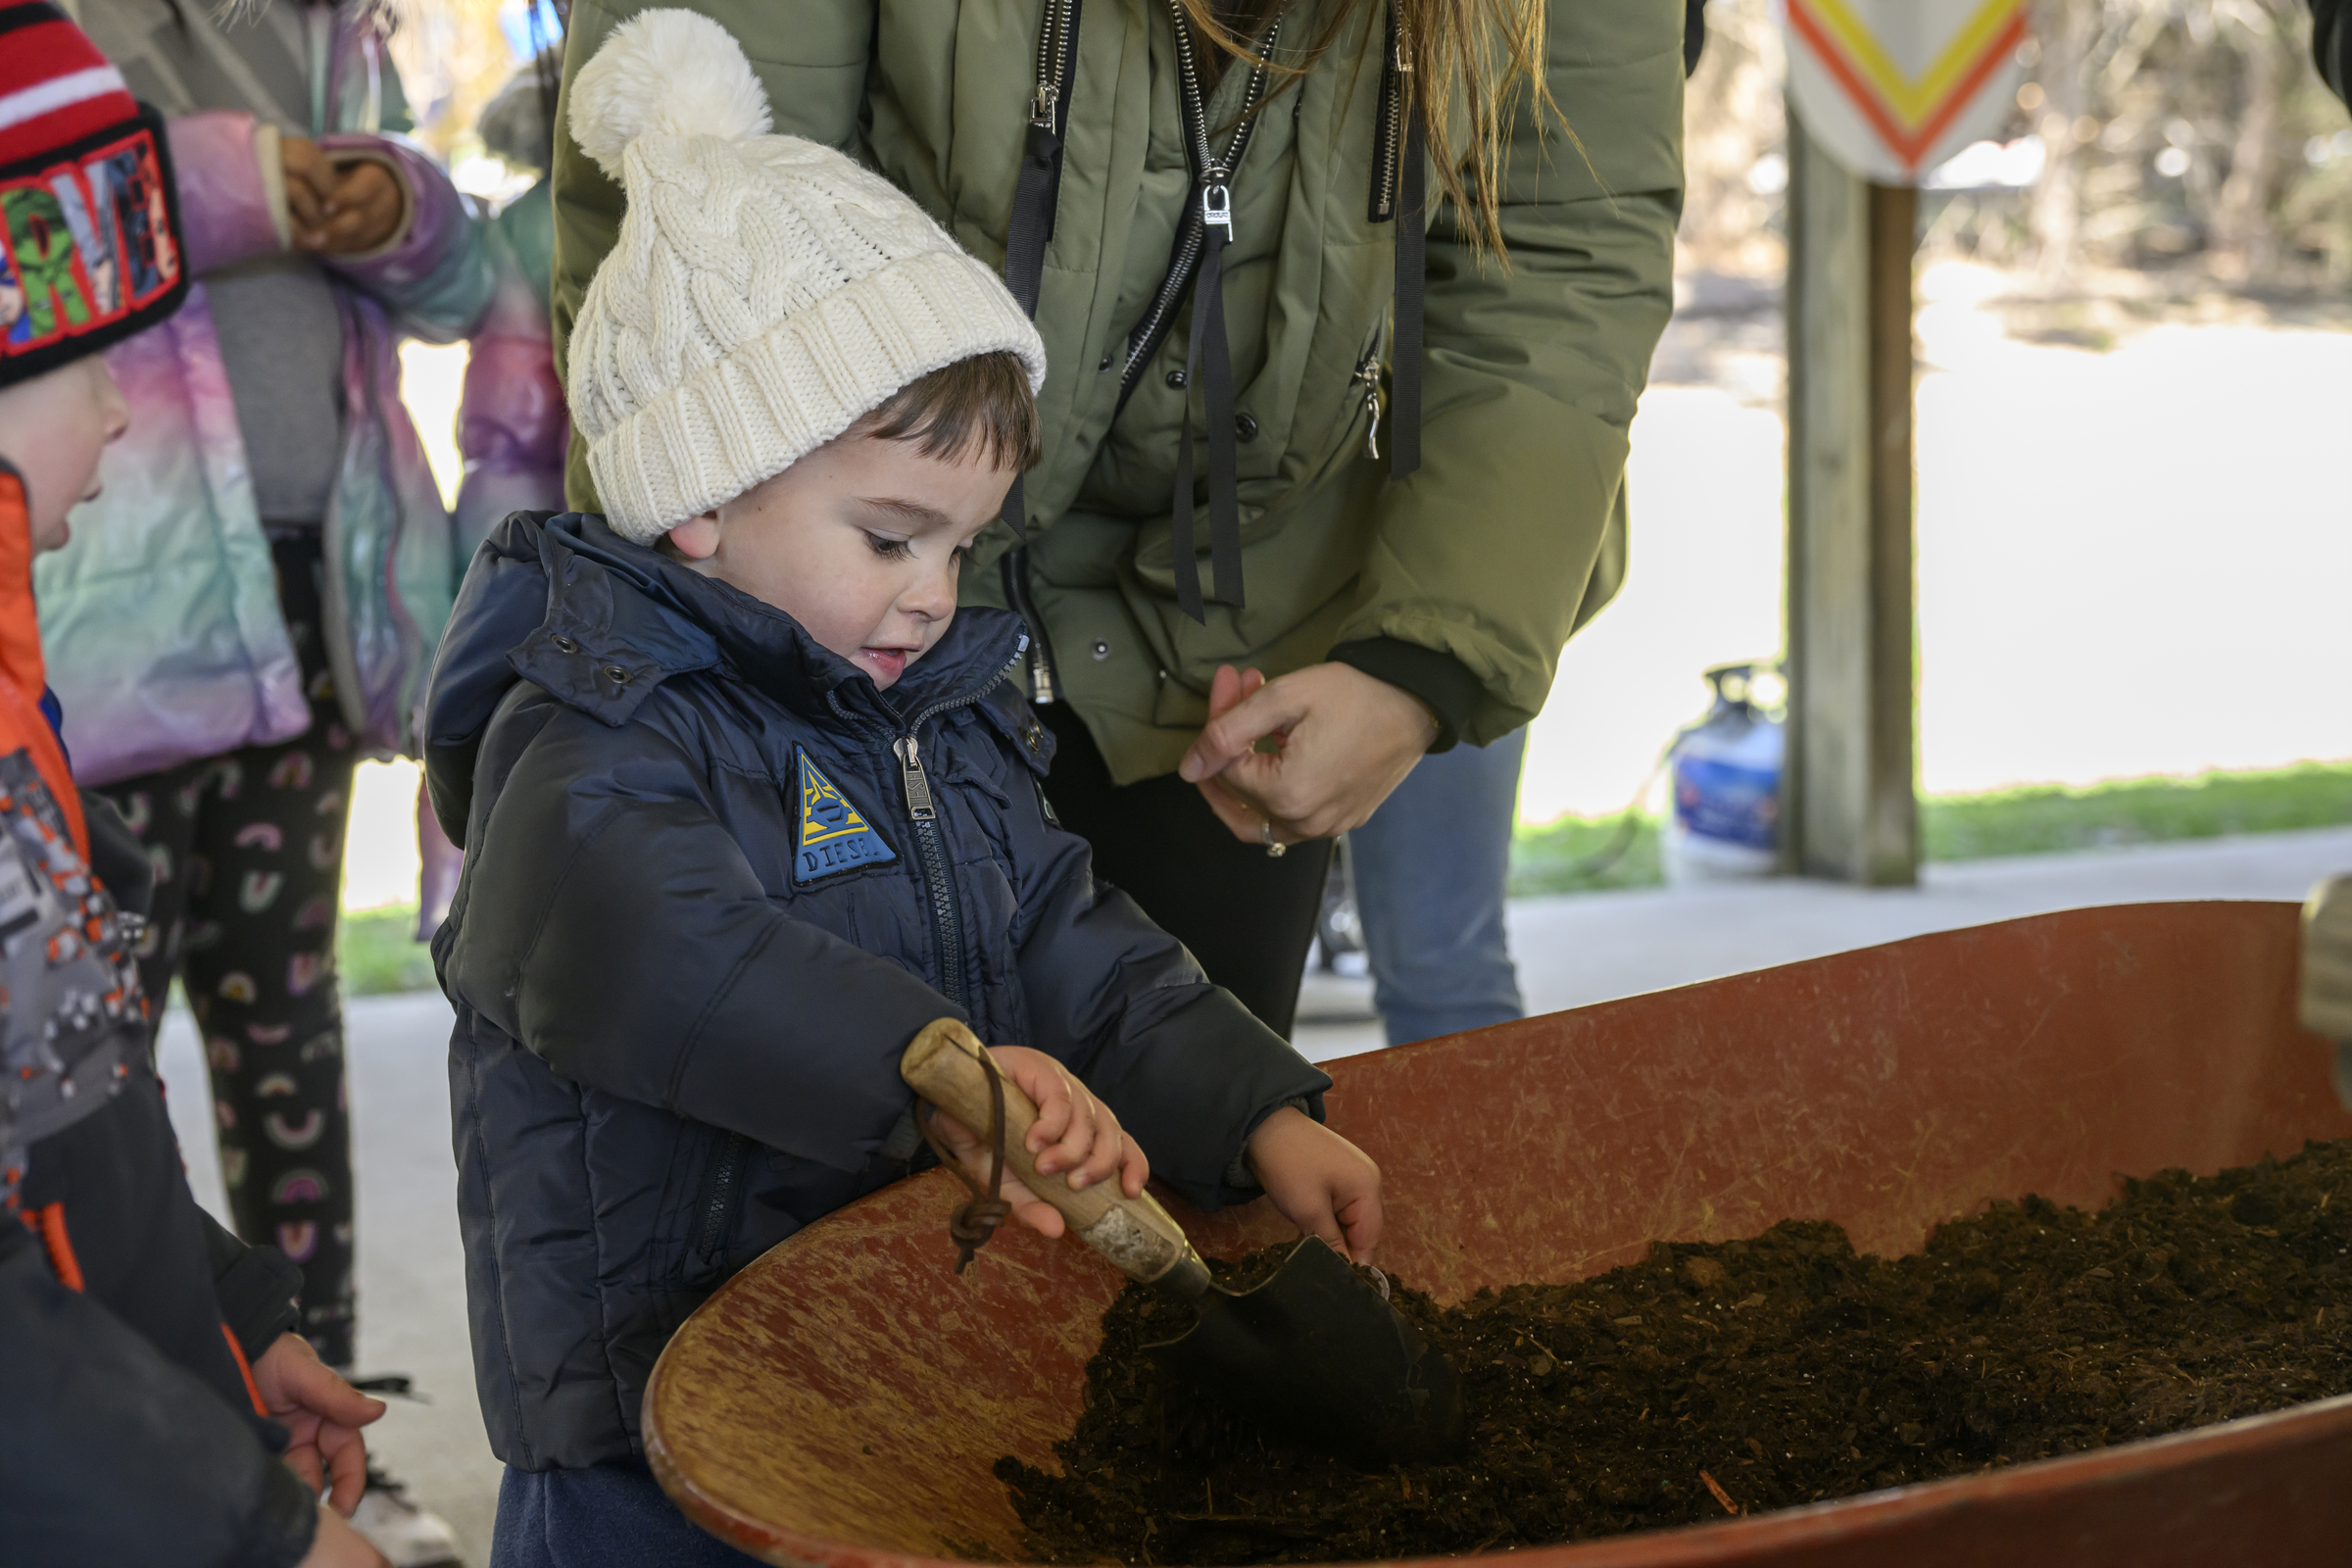 Luca Echavarria,3, gathers dirt to plant a flower during the Coppermine Eggstravaganza at Cascade Park in Hampstead. (Thomas Walker/Freelance)